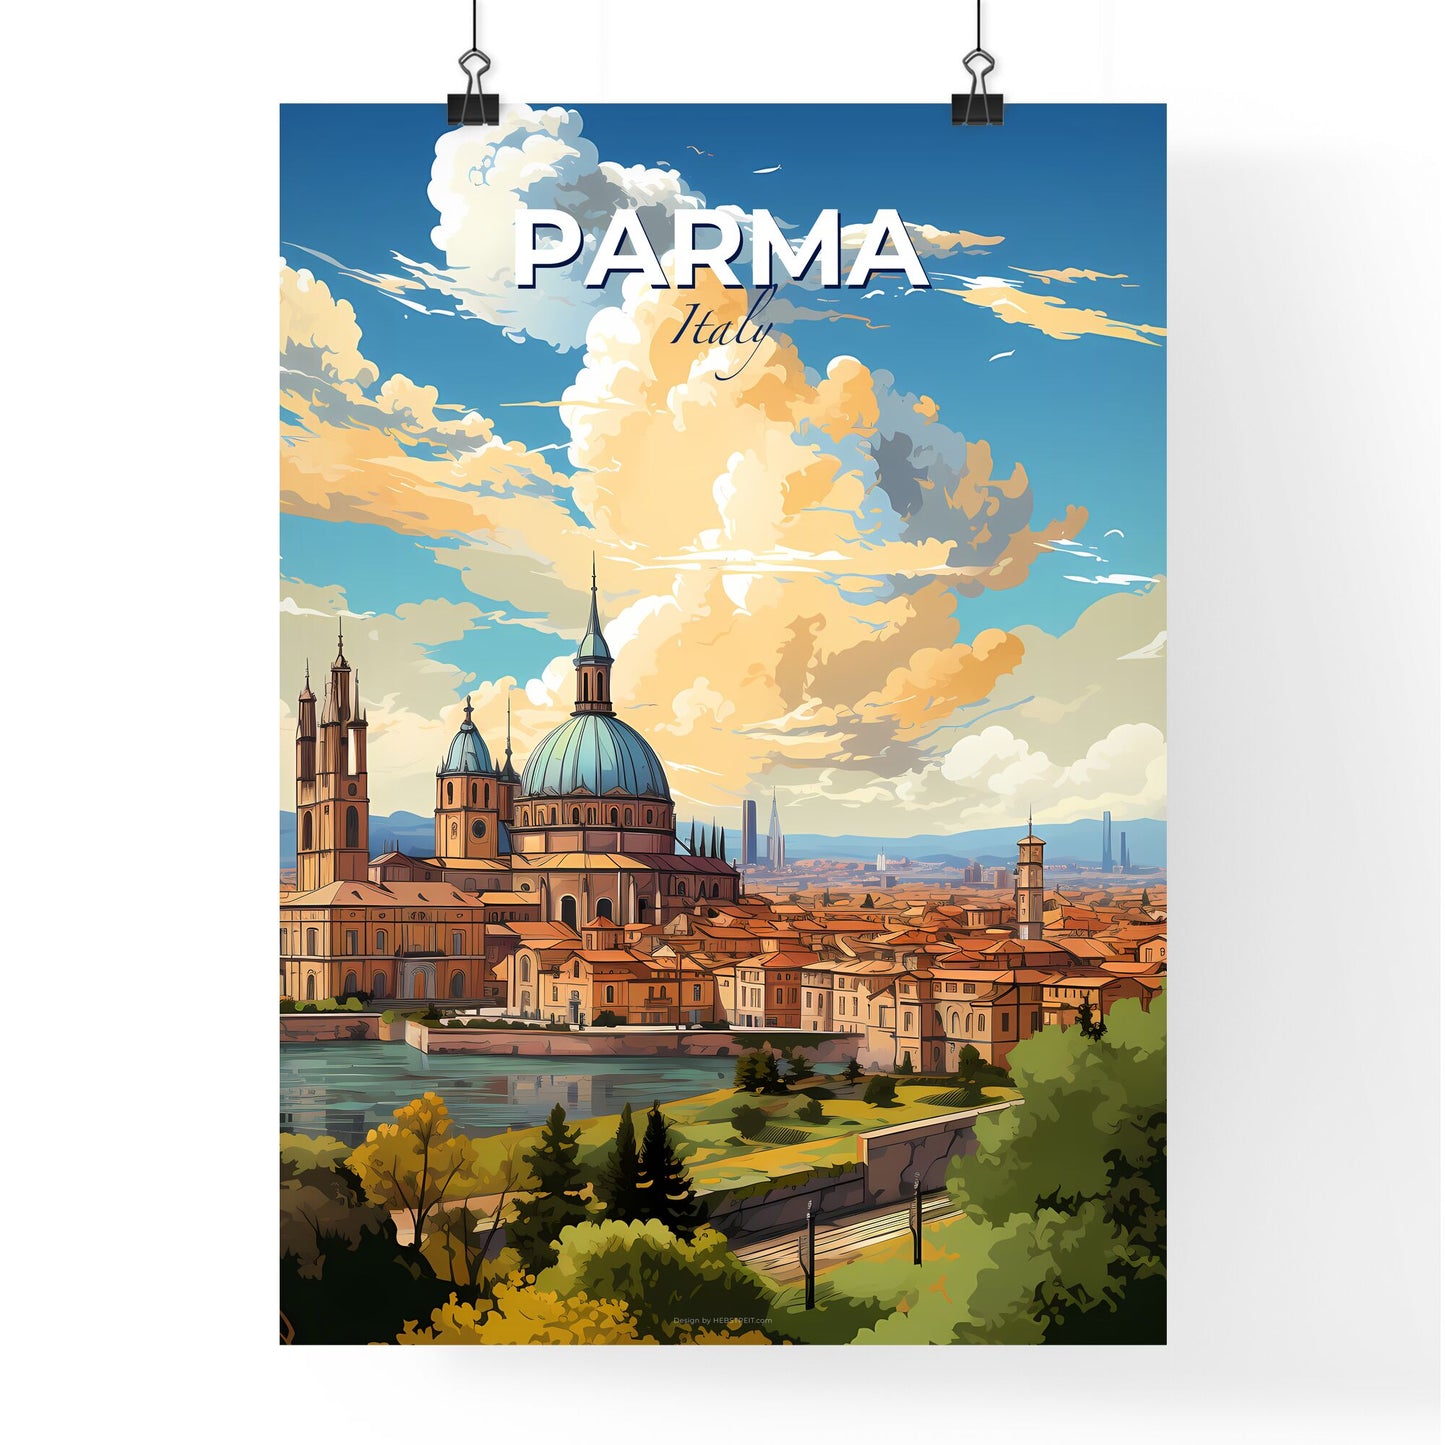 Parma Italy Skyline - A City With A Blue Dome And Towers - Customizable Travel Gift Default Title